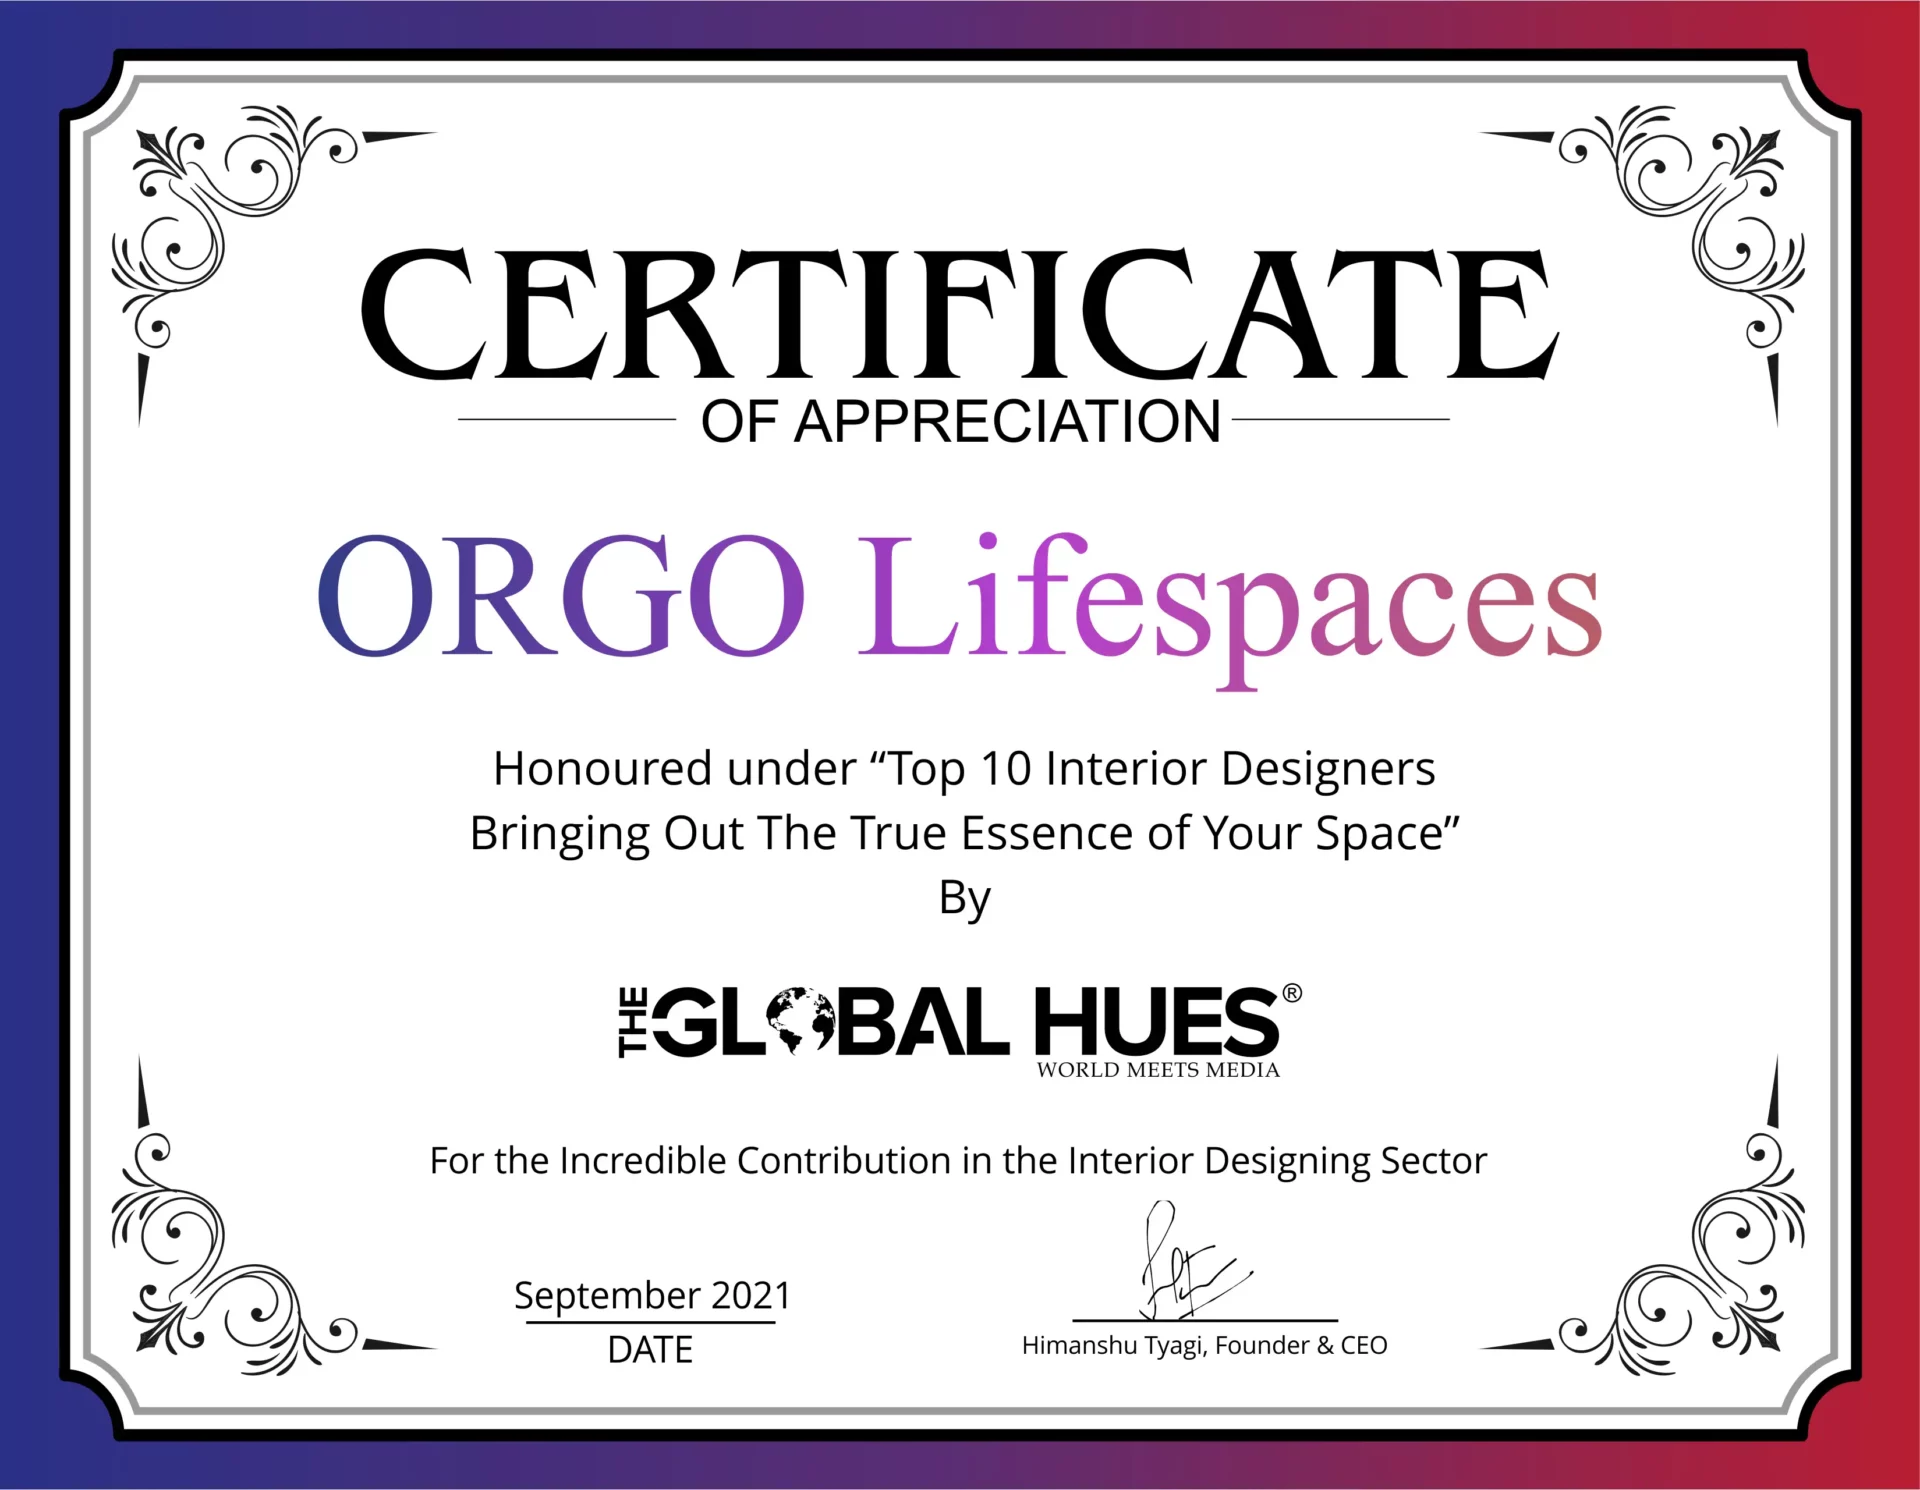 ORGO Interiors was honoured as the Top 10 Home Interior Designers in Chennai by Global Hues.